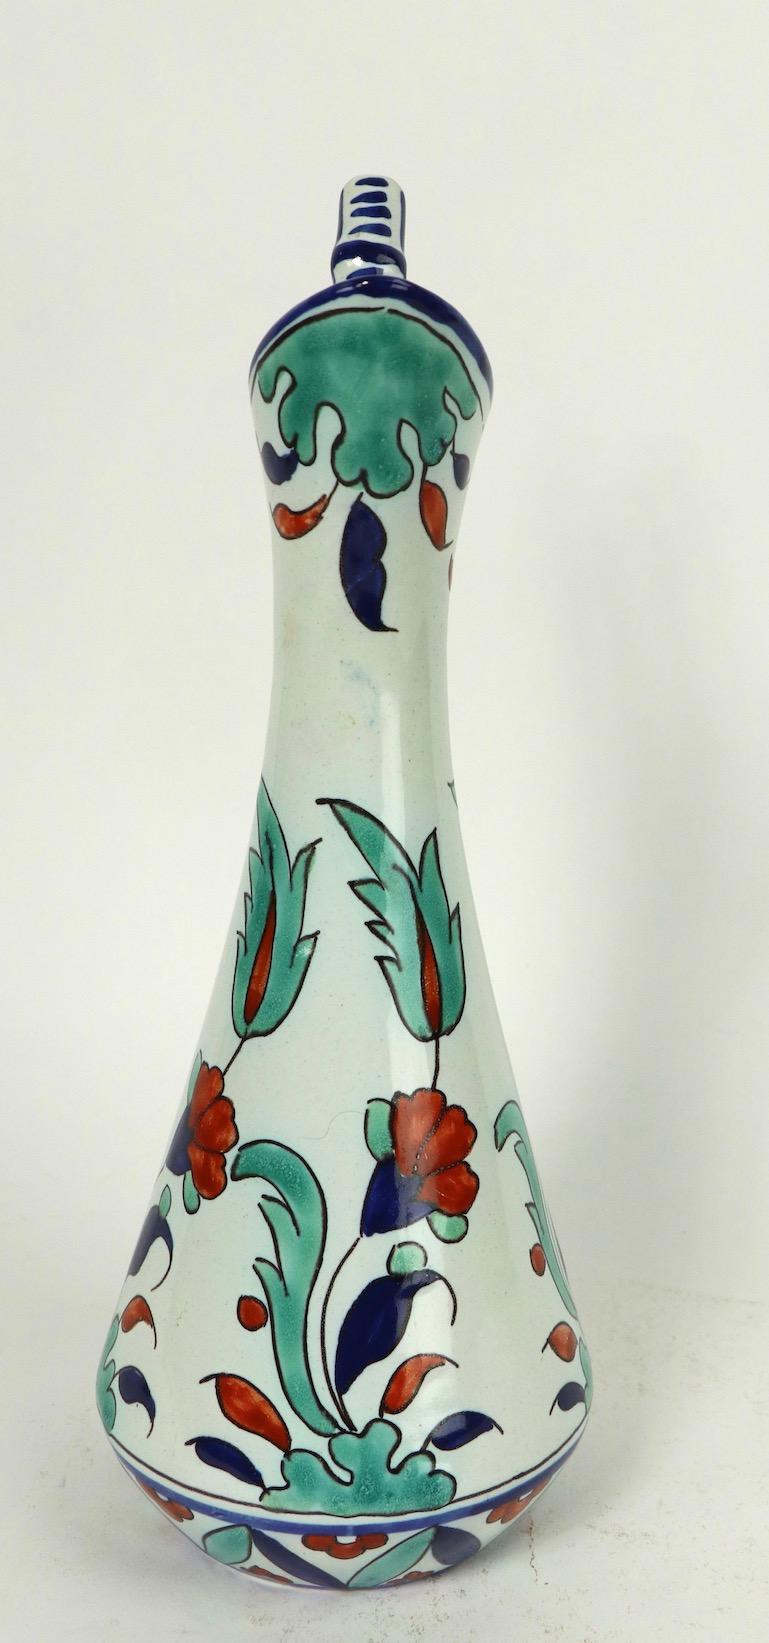 French Faience Ceramic Jug by Henri Delcourt 1